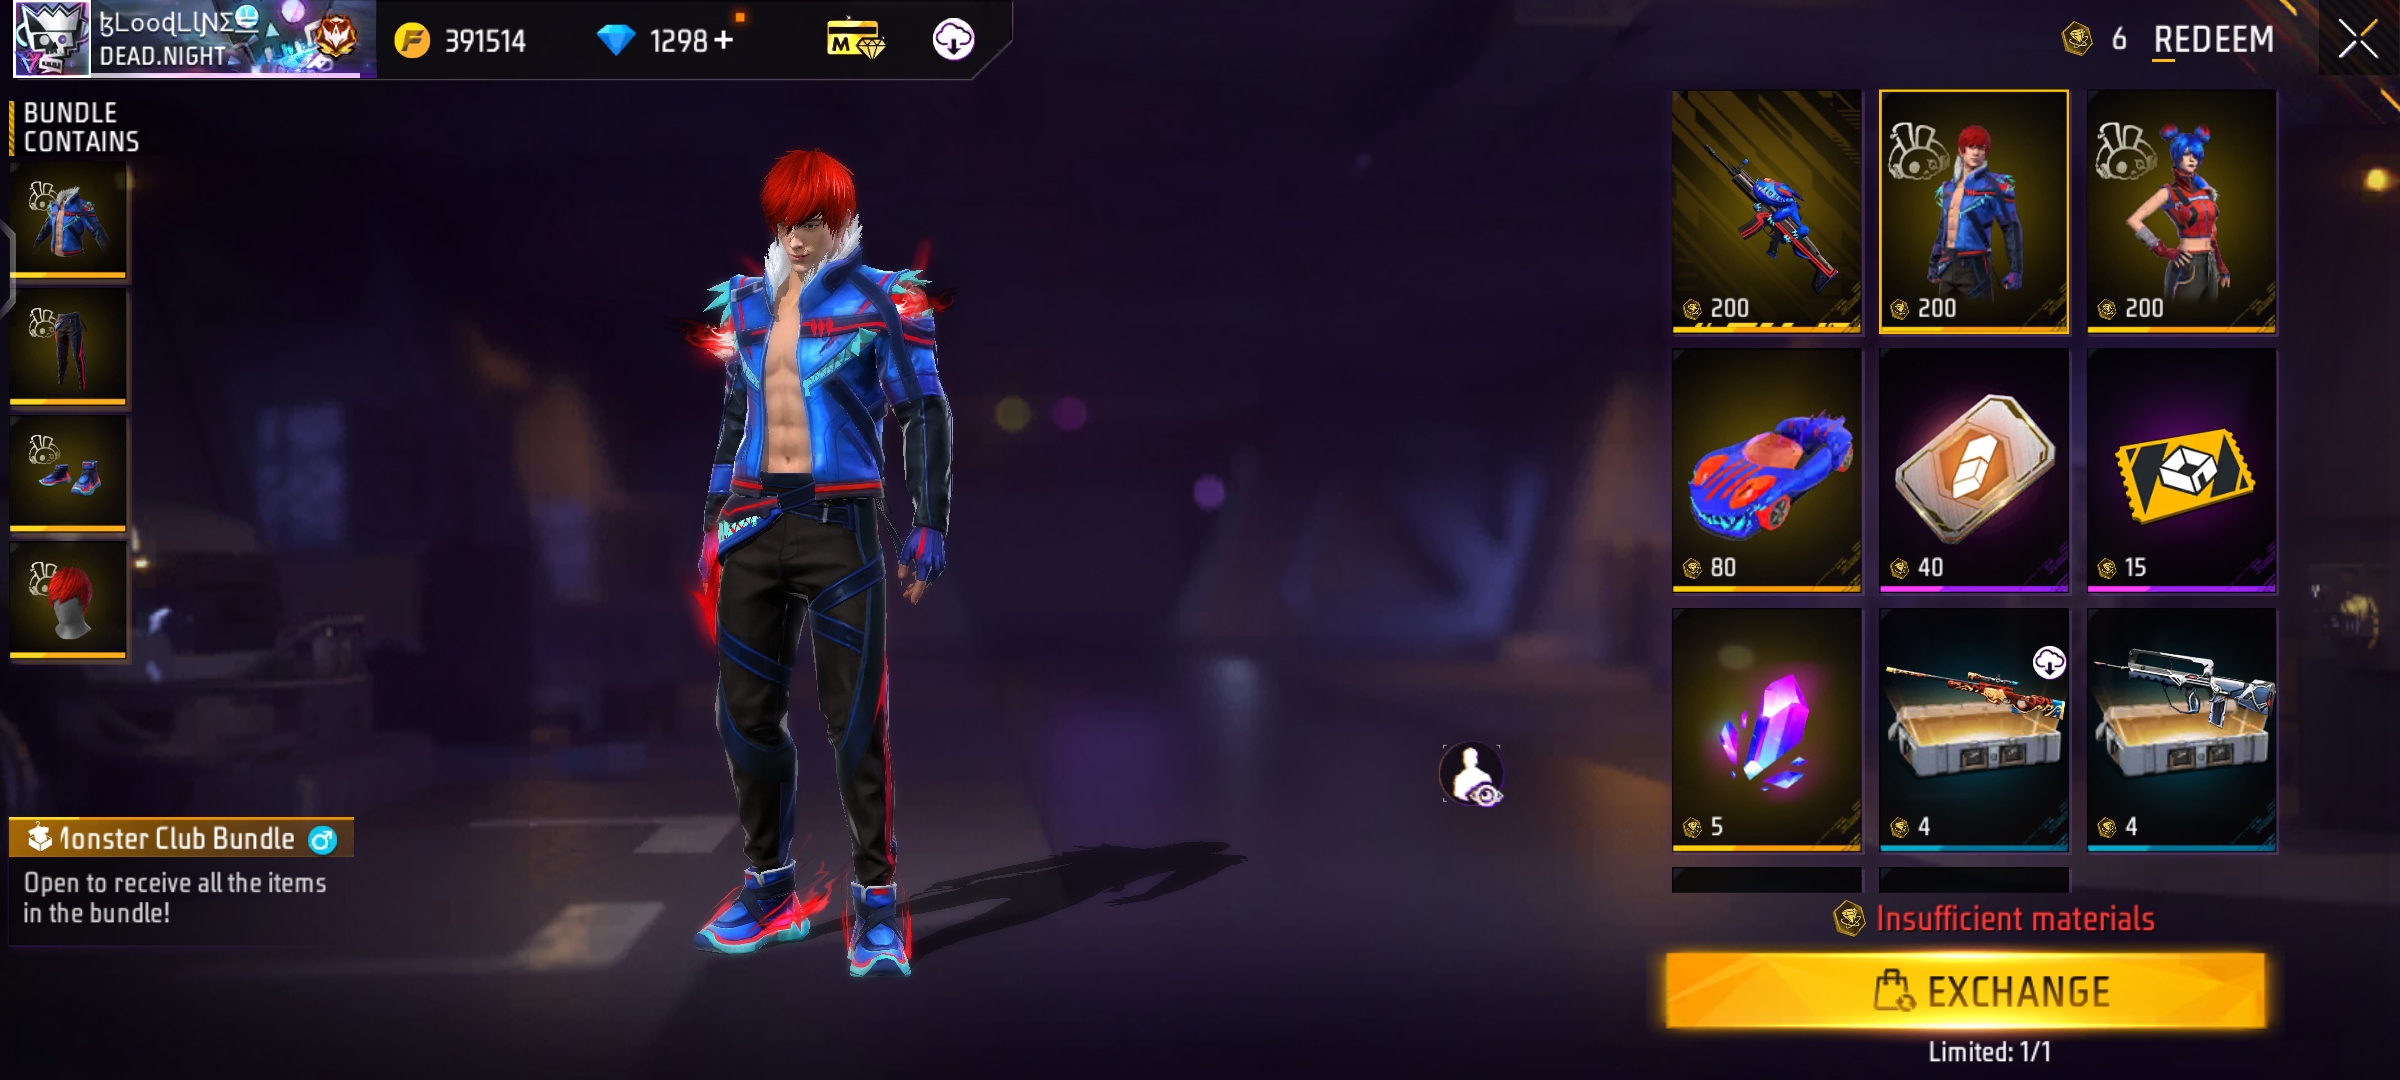 How To Get The Monster Club Bundle In Free Fire Max